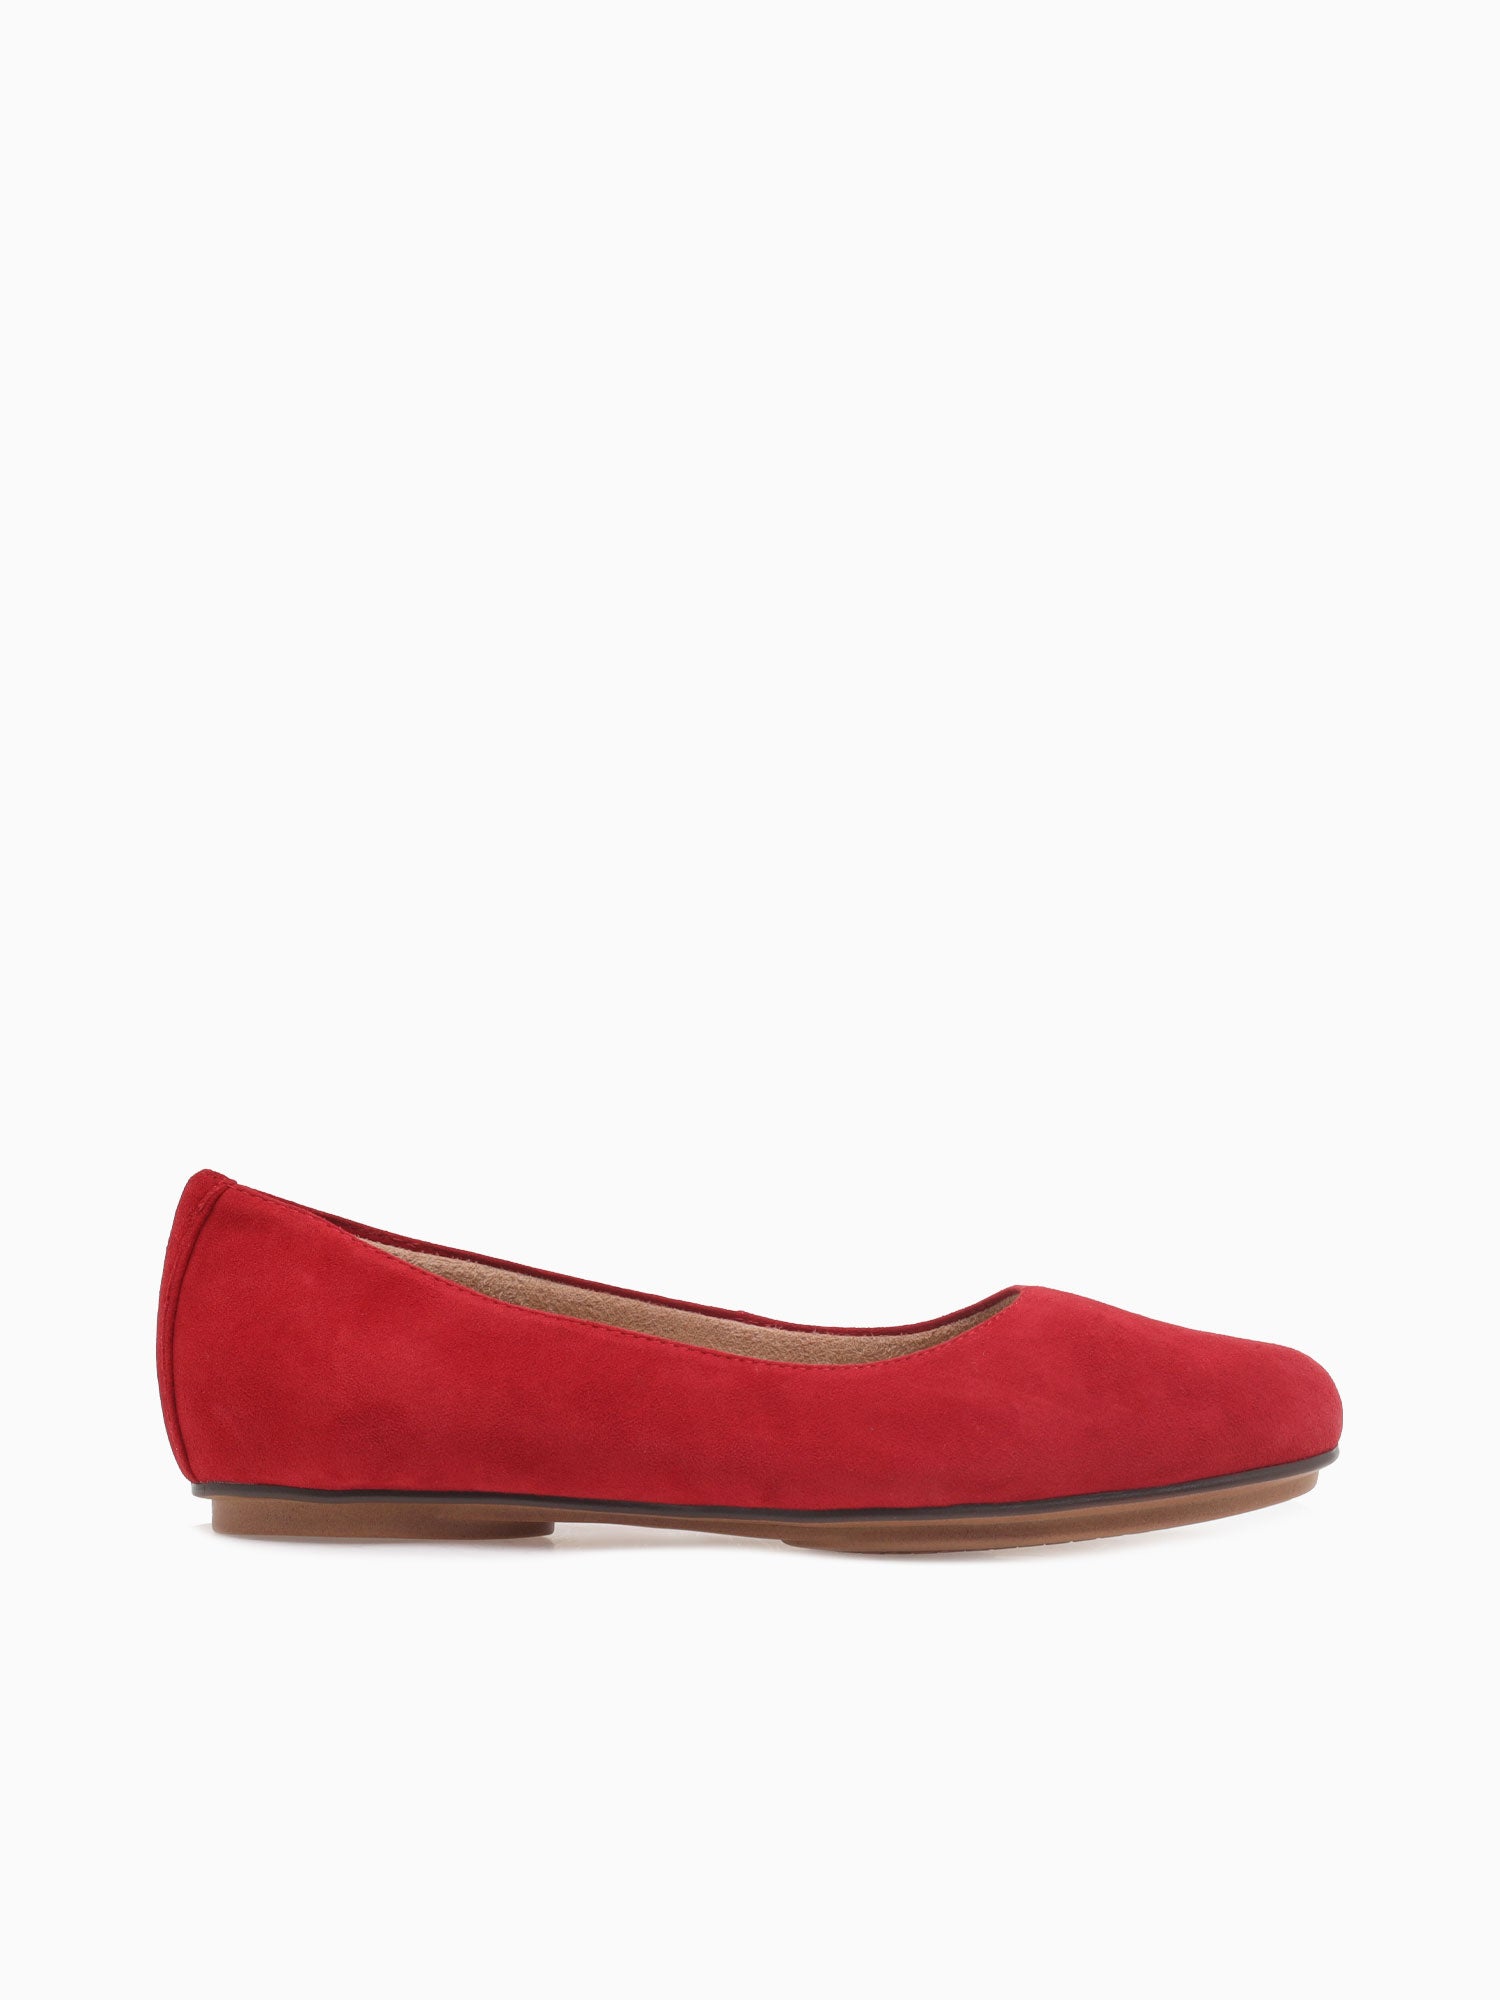 Maxwell Hot Sauce Suede Leather Red / 5 / M